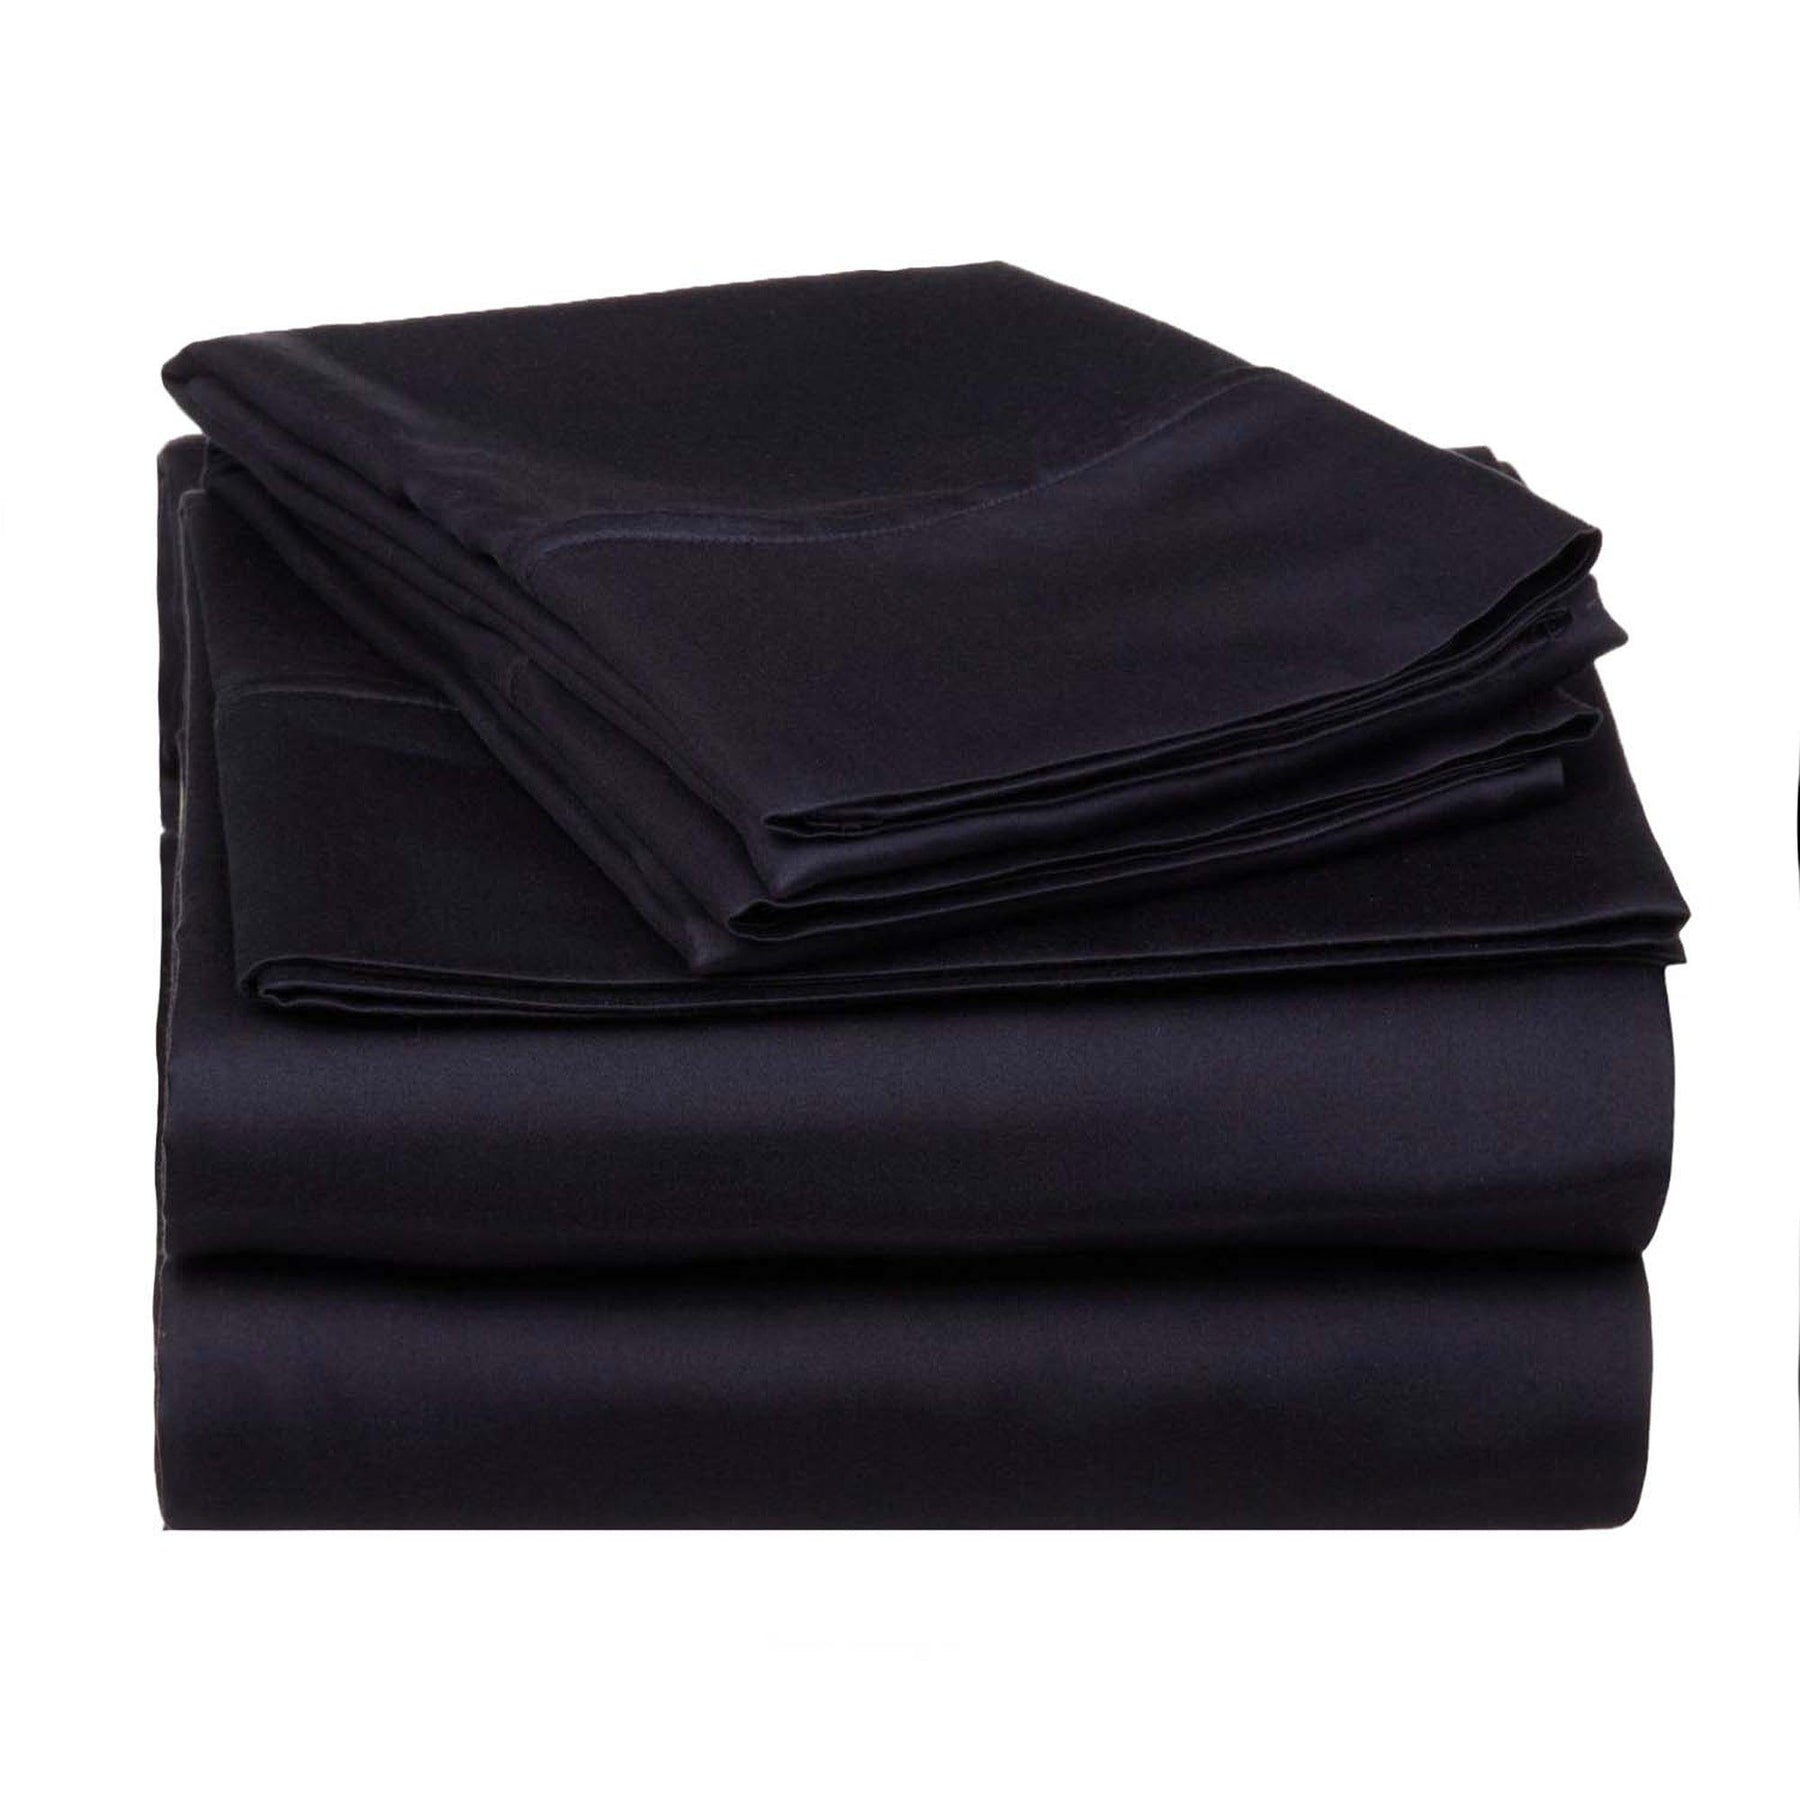  Superior Egyptian Cotton 530 Thread Count Solid Sheet Set - Navy Blue